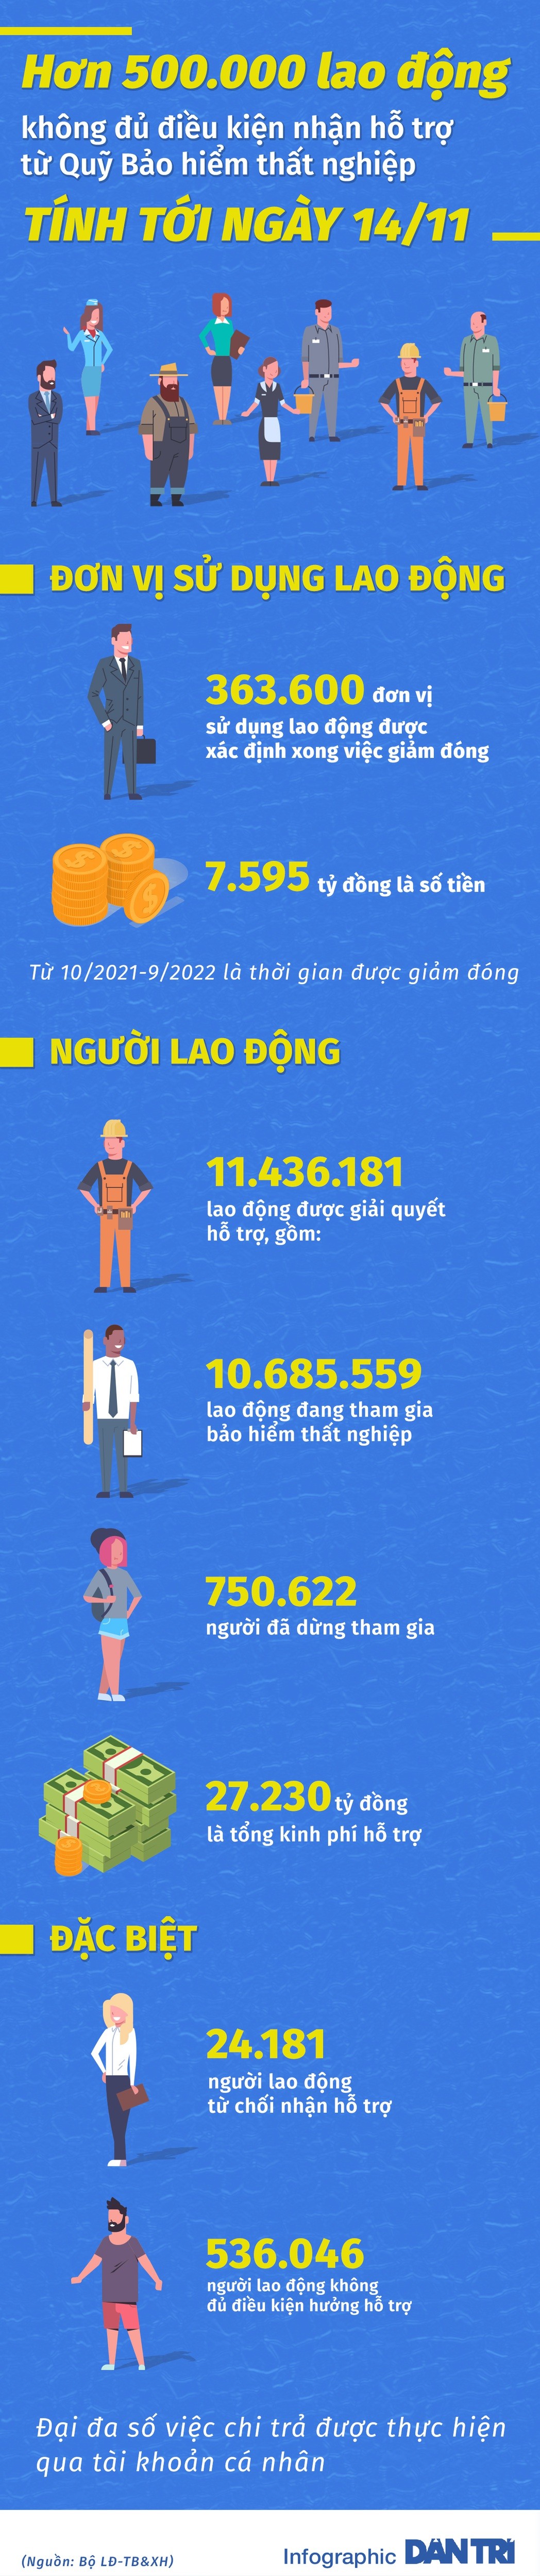 infographic-nguoi-lao-dong-goi-ho-tro-38ty-1638007517.jpg